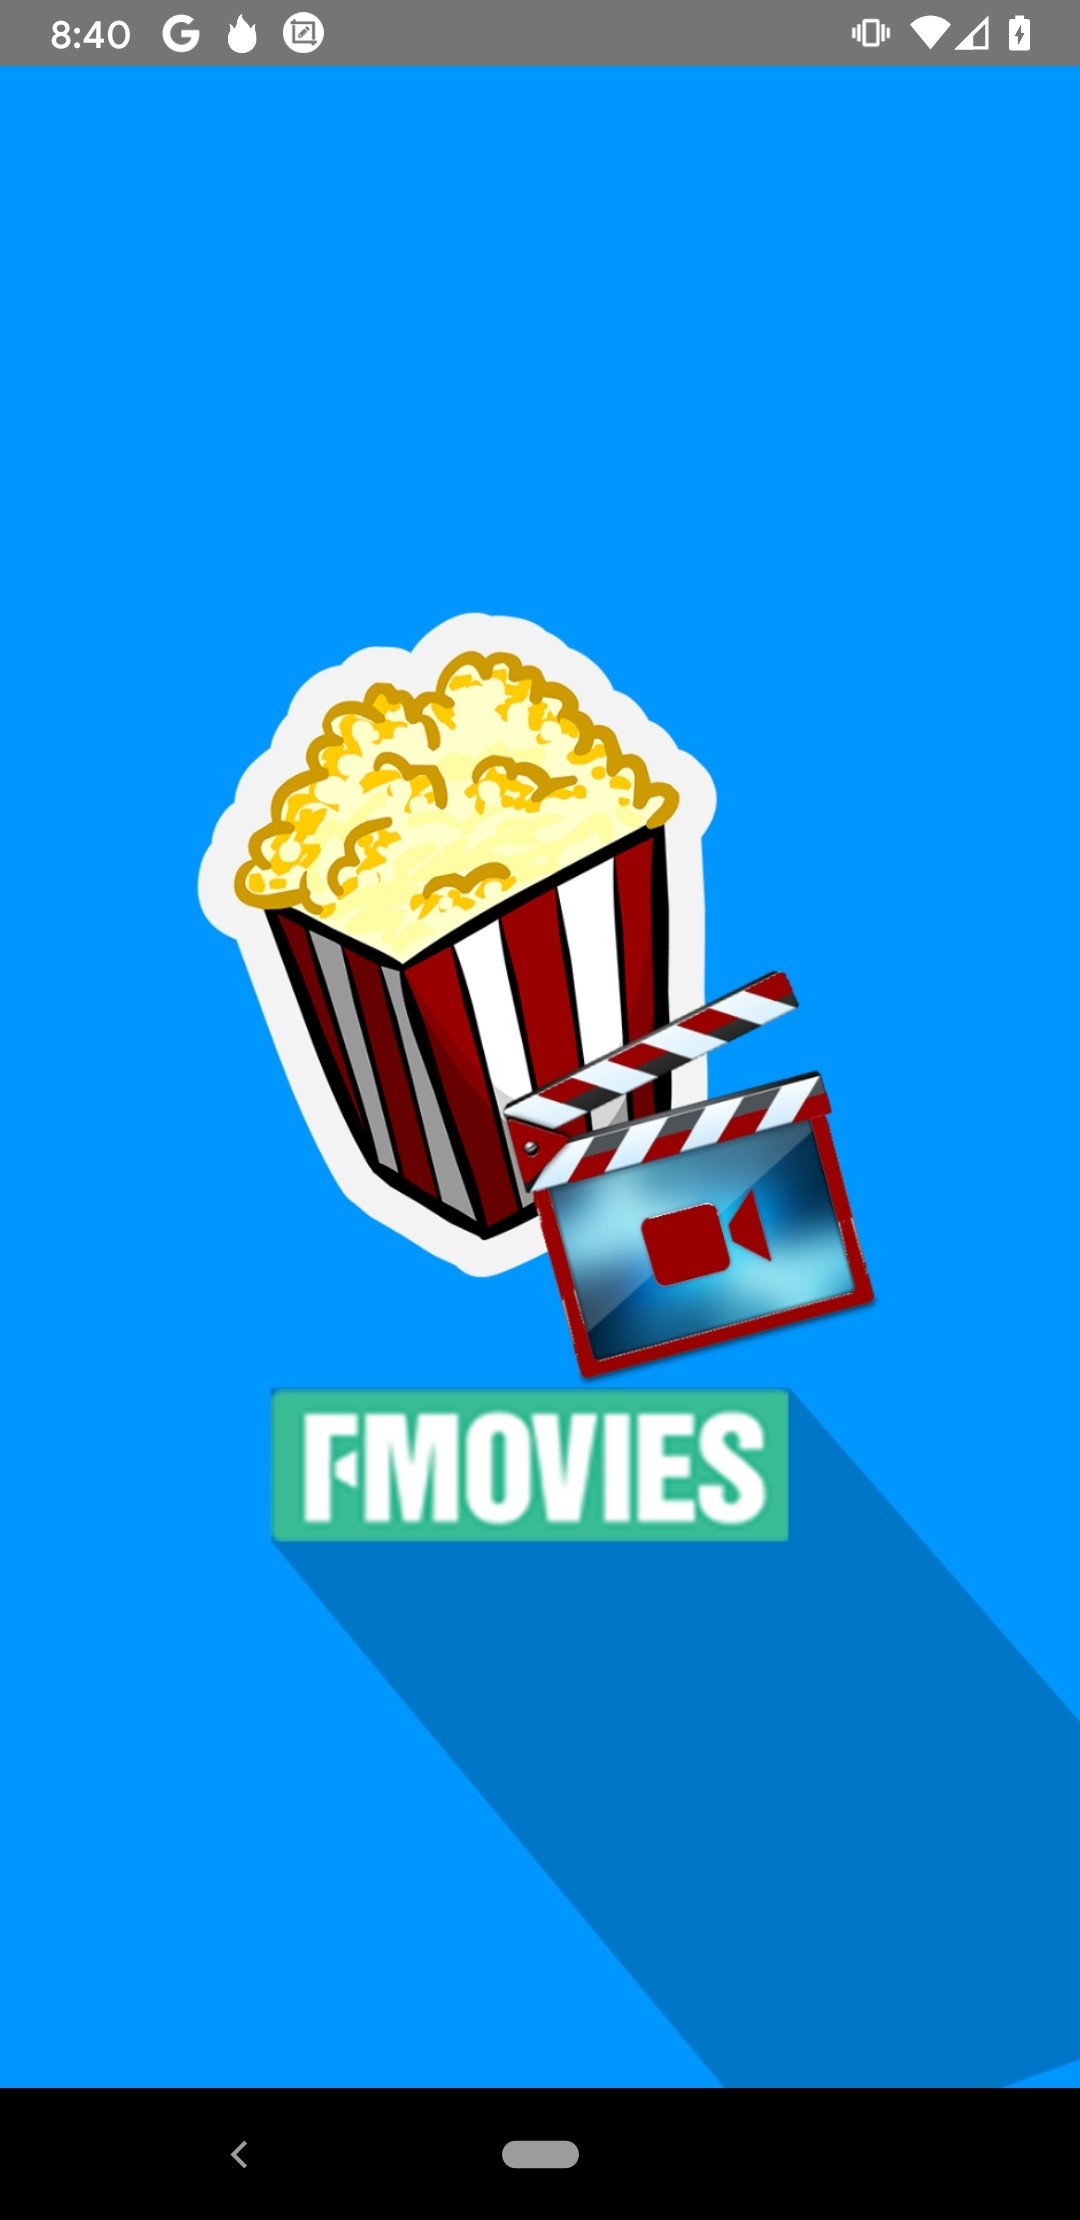 Fmovies 3.2 Download for Android APK Free